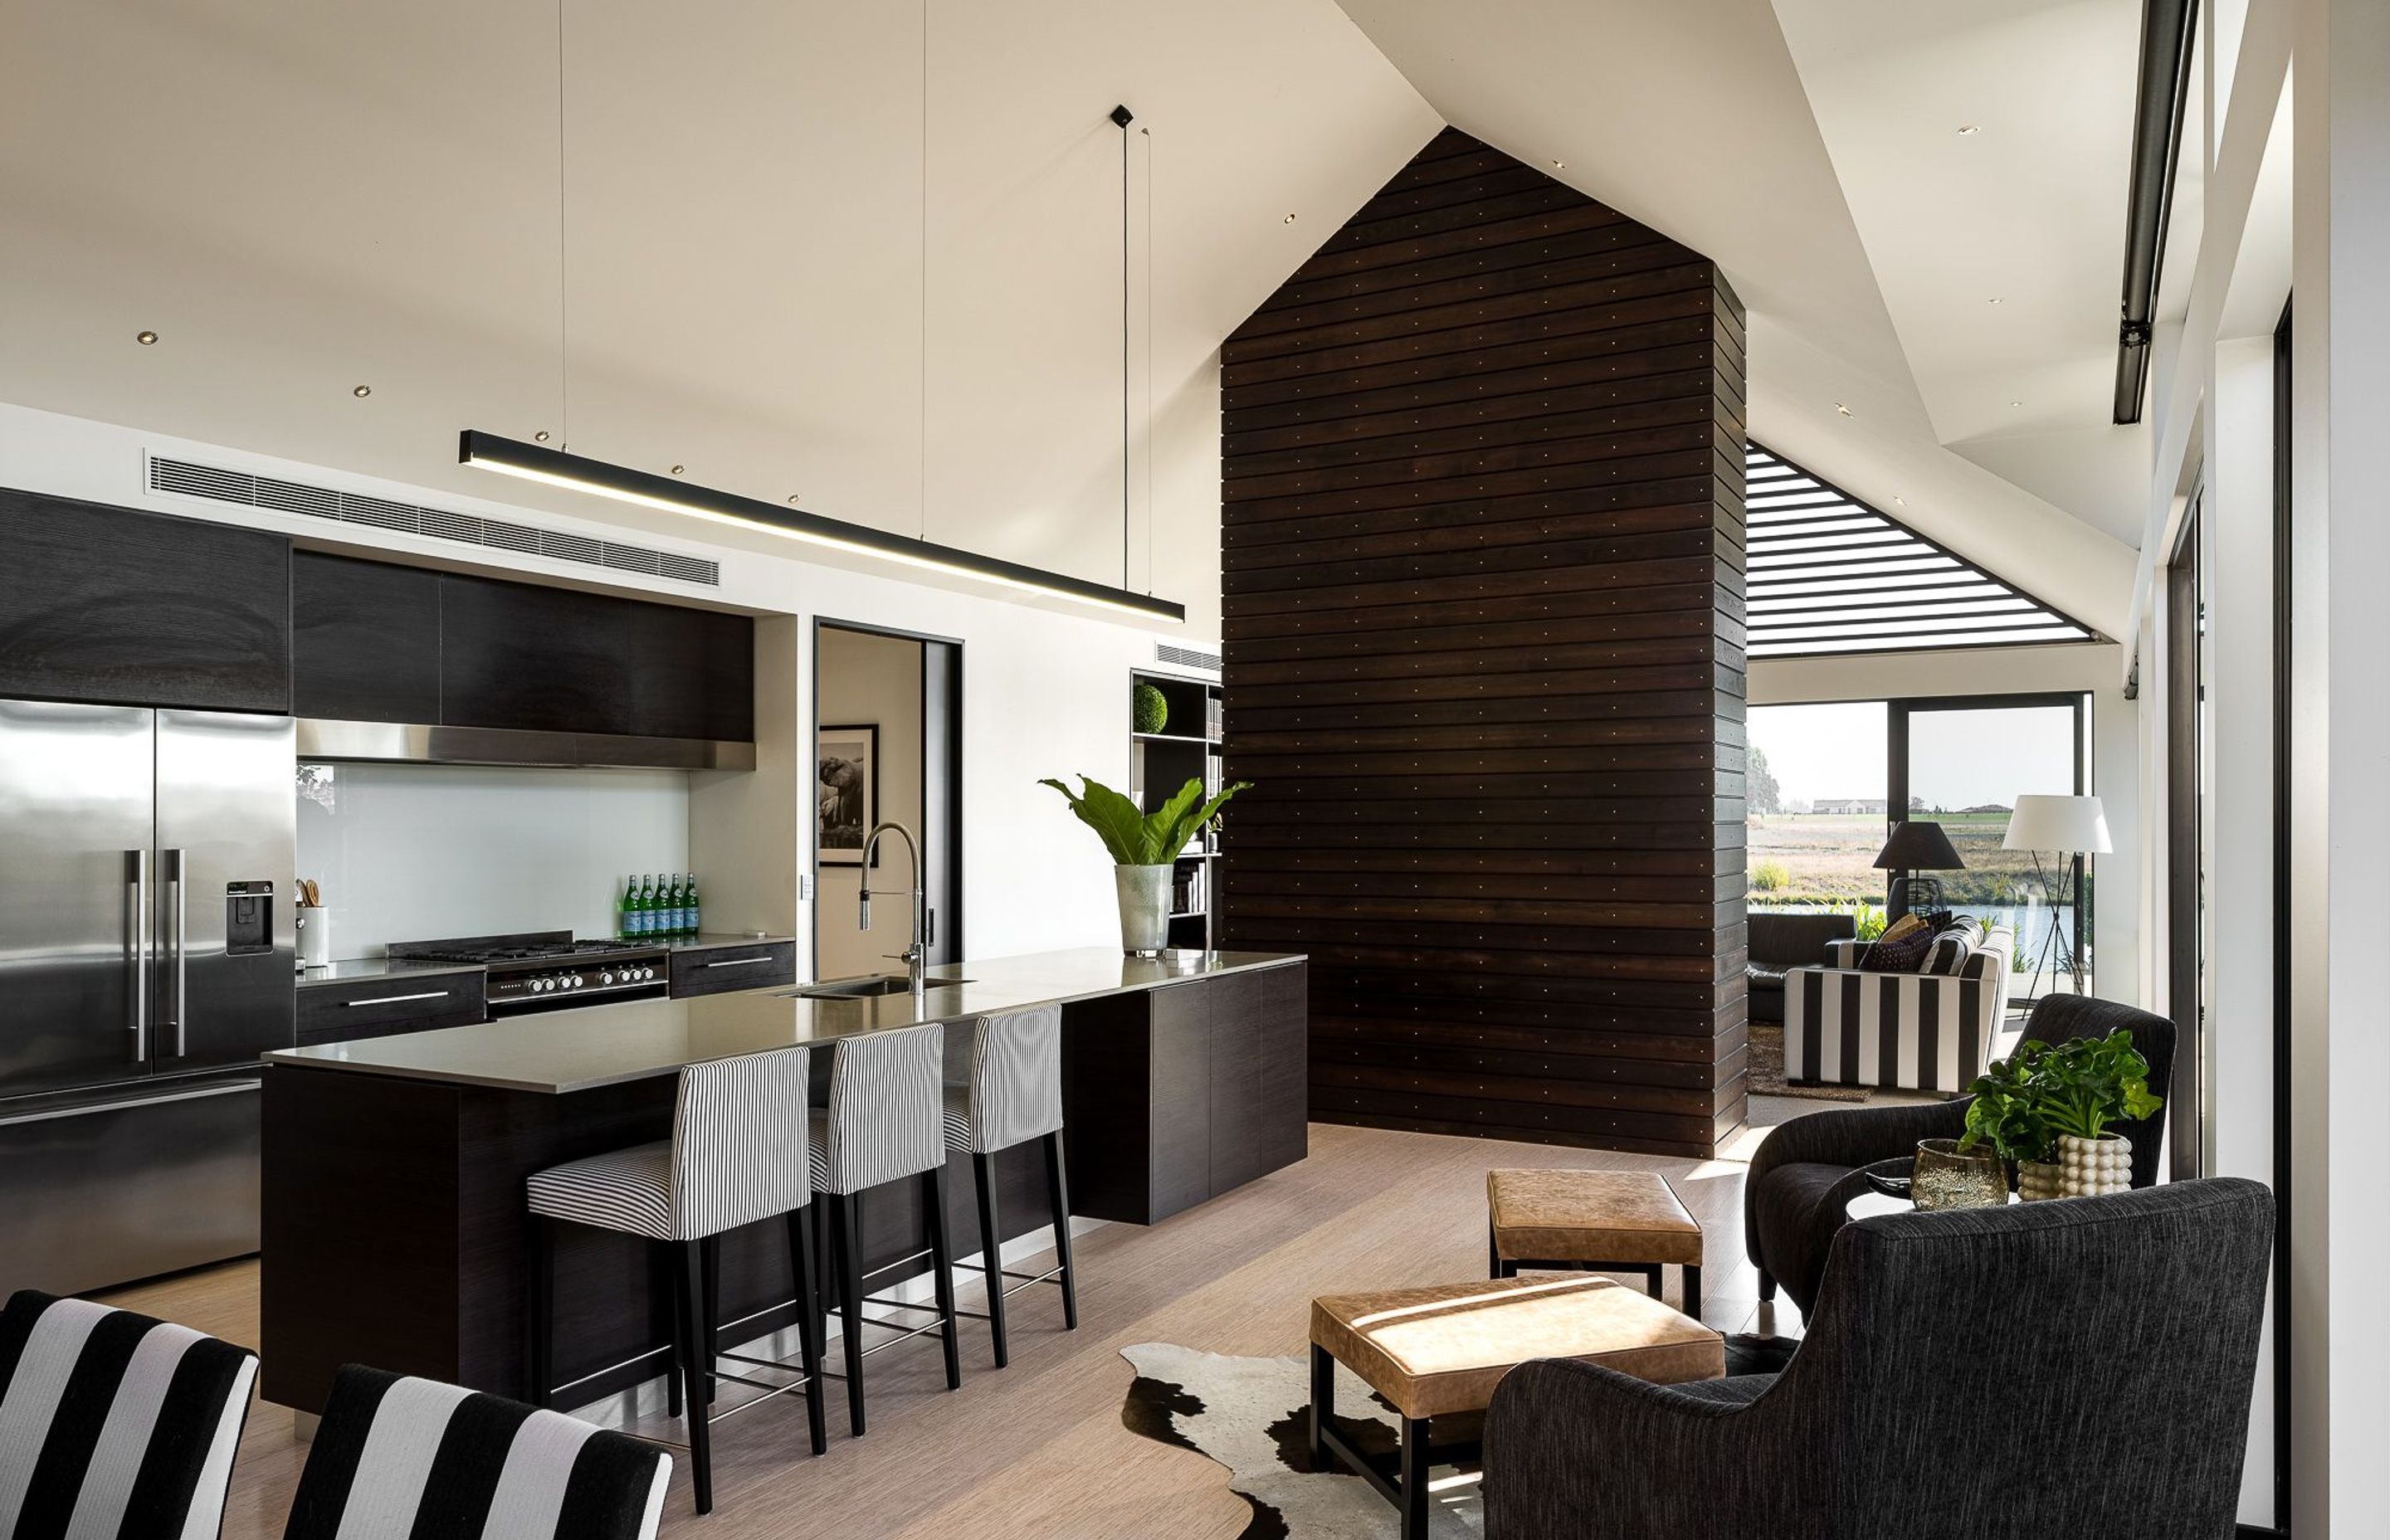 The black and white colour scheme continues into the interior, punctuated with browns and greens.